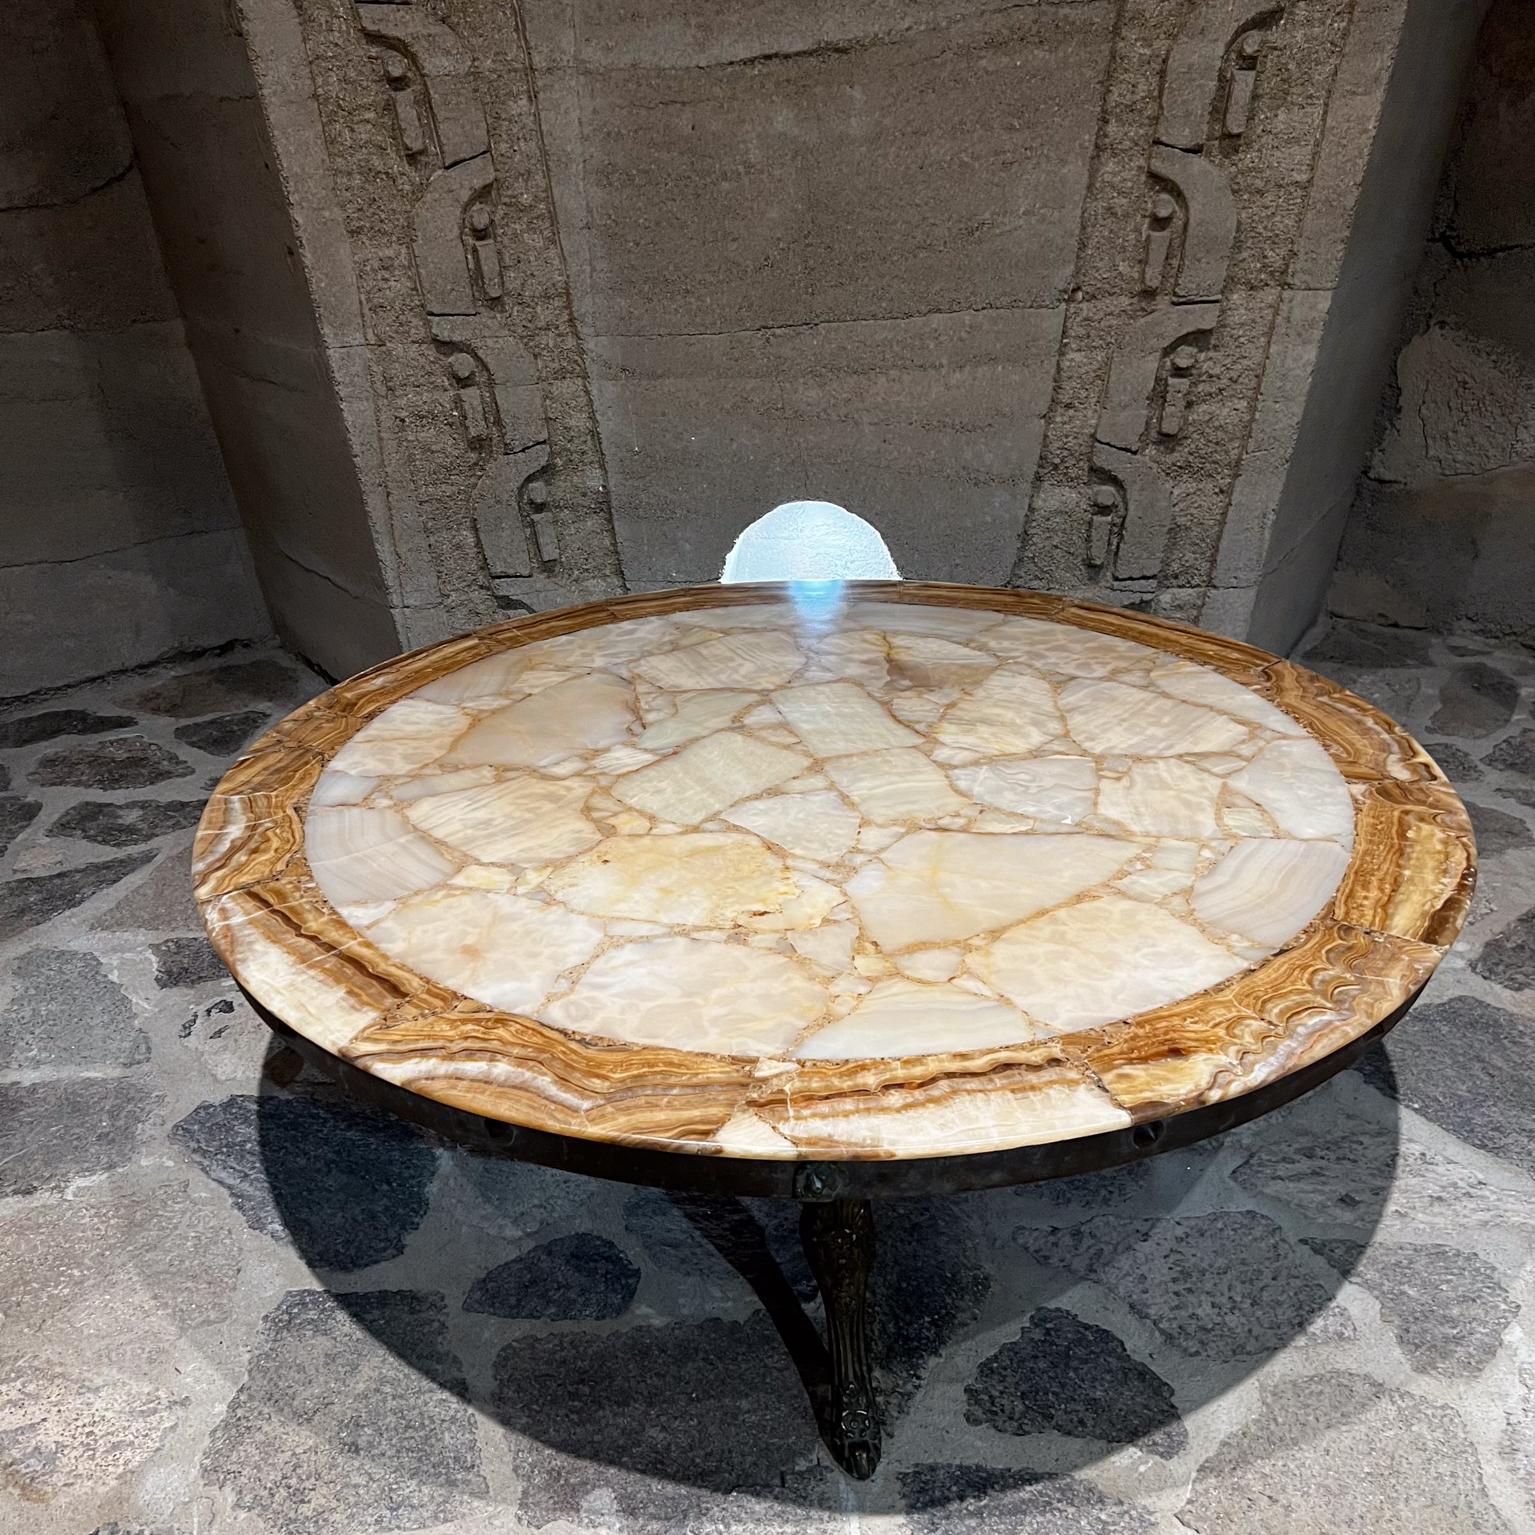 AMBIANIC presents
1960s Muller of Mexico Glamorous Modern Round Onyx Stone Coffee Table Sculptural Cabriole Legs
Original preowned vintage condition. Tabletop has been restored, new satin finish.
New bronze legs.
47.25 diameter x 13 h
Refer to